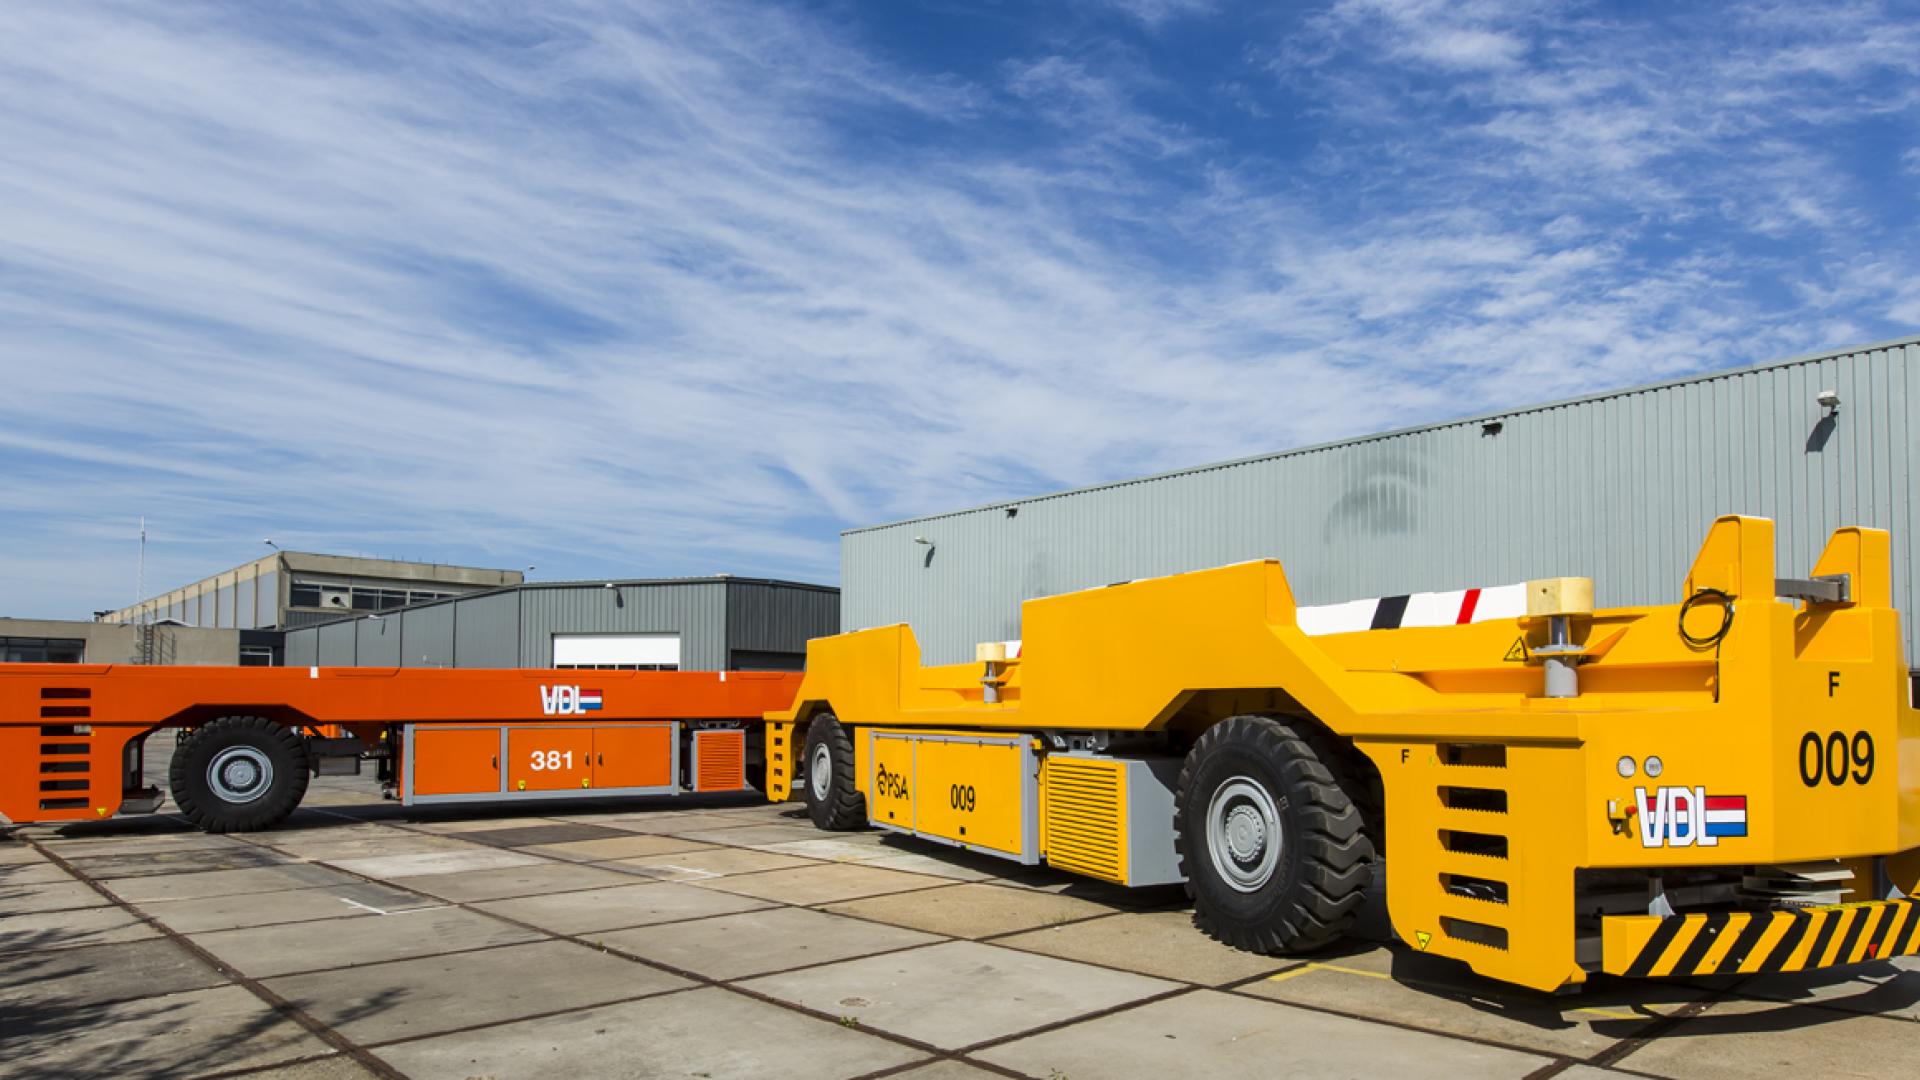 VDL secures a mega order: 80 automated guided vehicles for Singapore